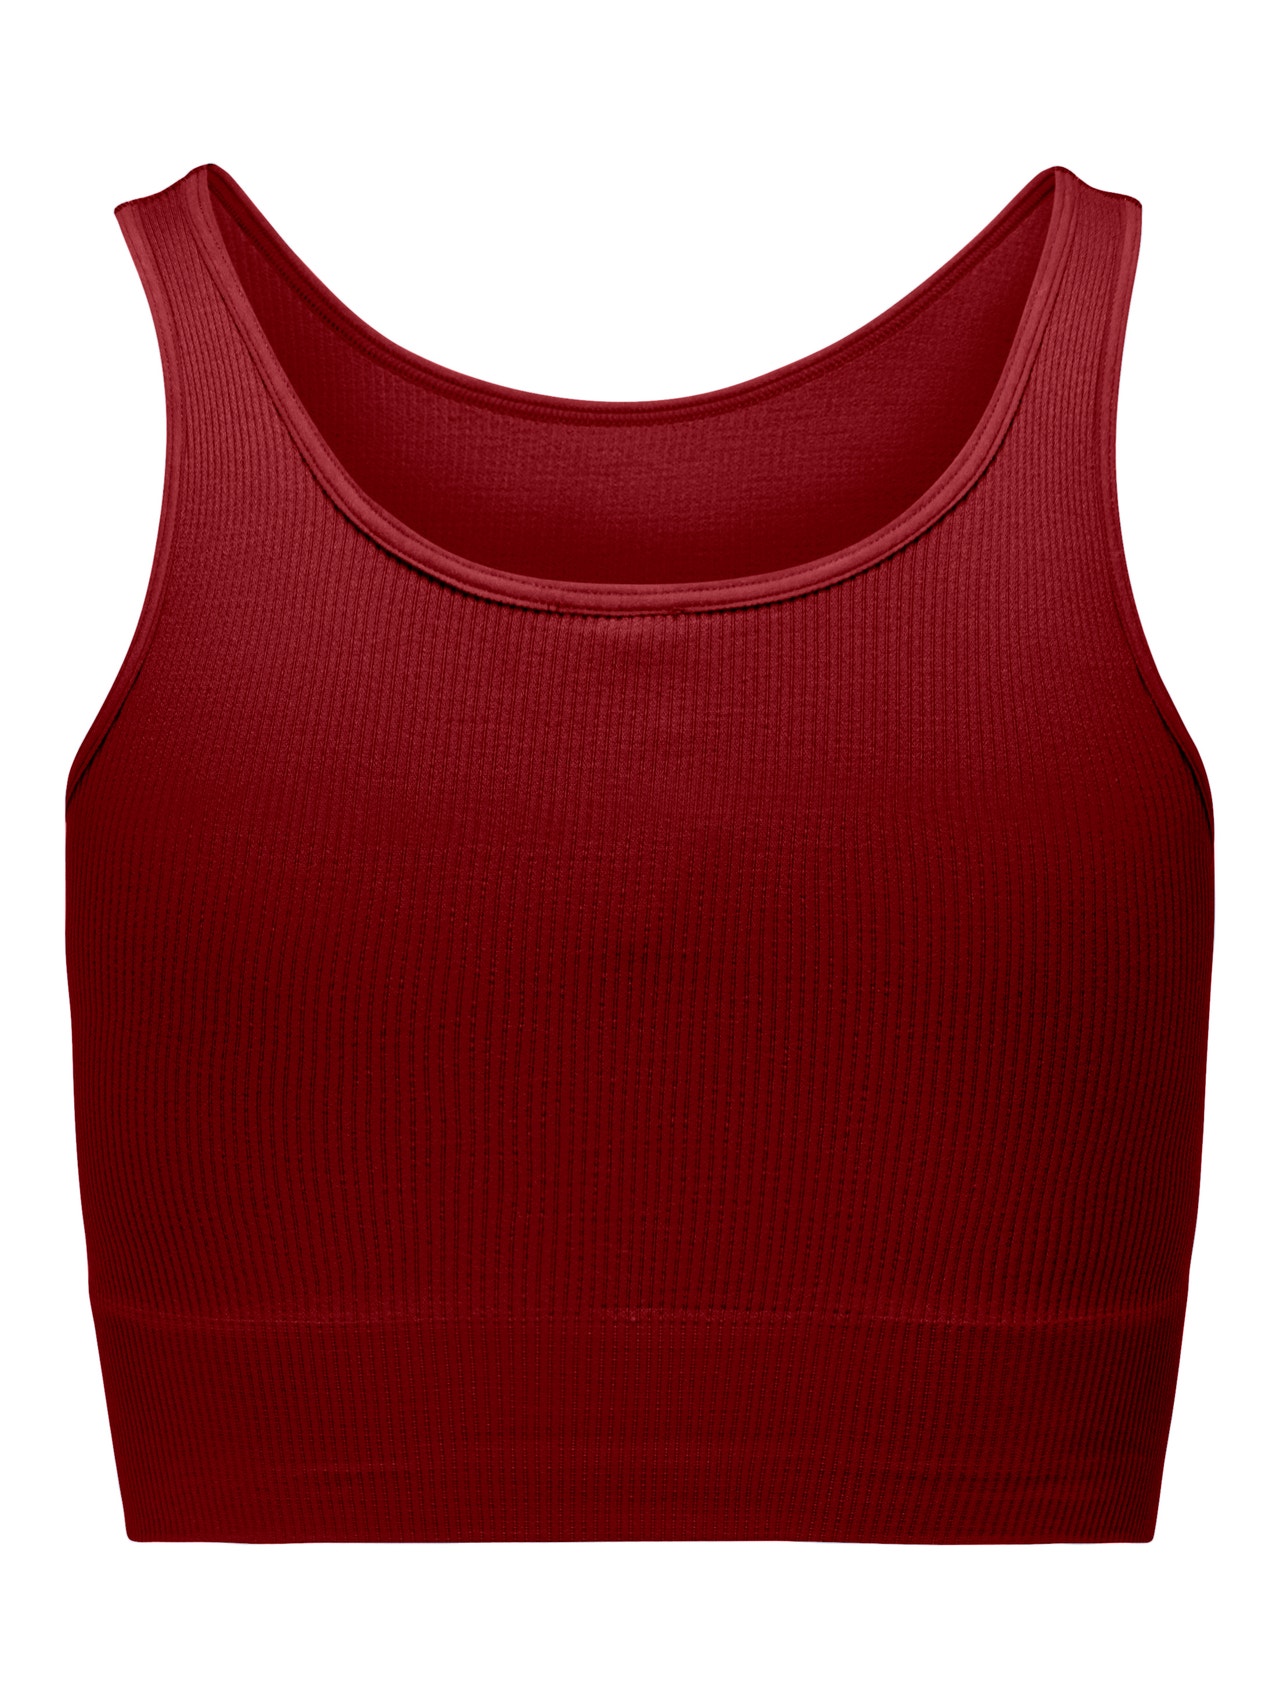 ONLY Seamless Cropped Training Top -Sun-Dried Tomato - 15250051